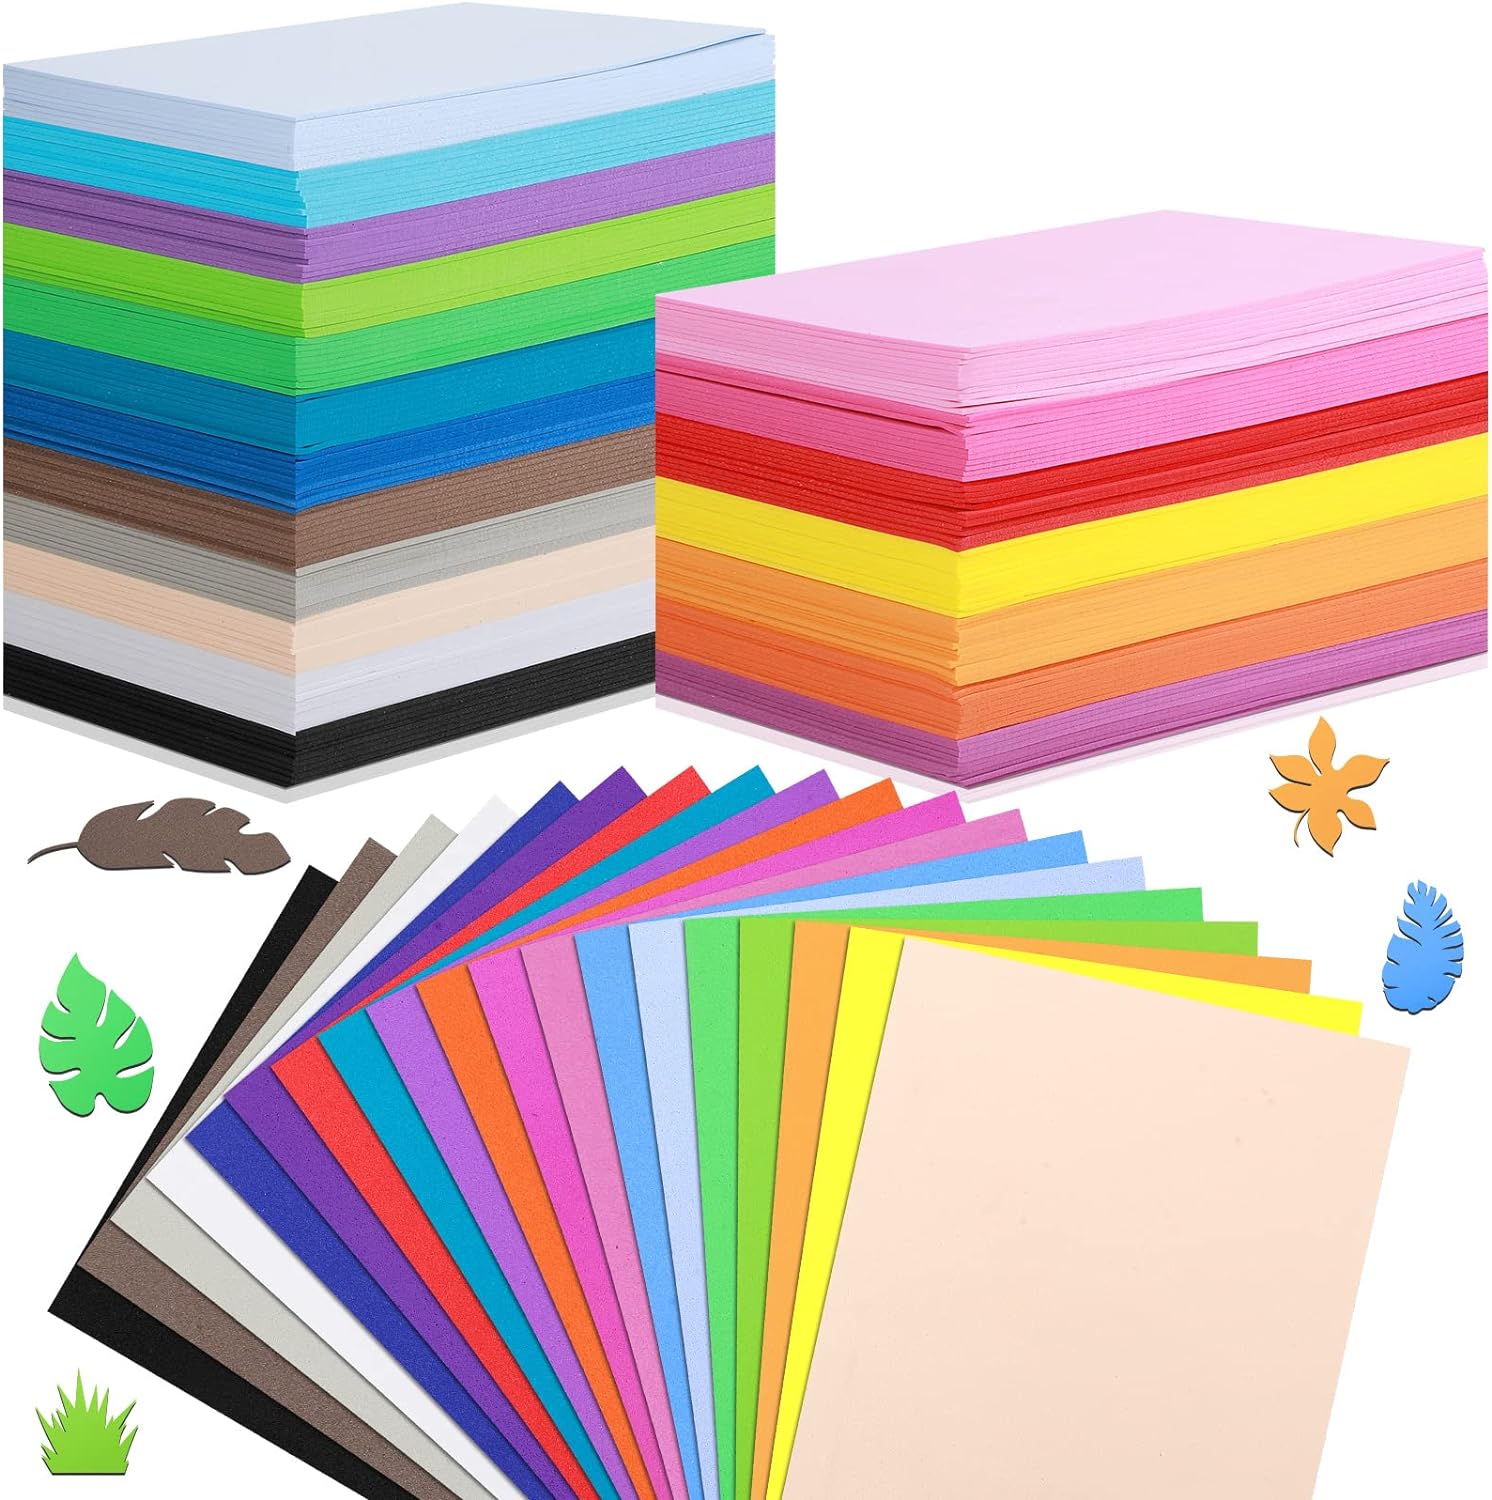 200 Sheets Colorful Eva Foam Sheets Crafts Rainbow Colorful Foam Sheets Assorted Colors Foam Paper For Projects Art Signs Cards Scrapbooking DIY Handcraft By PAIDU